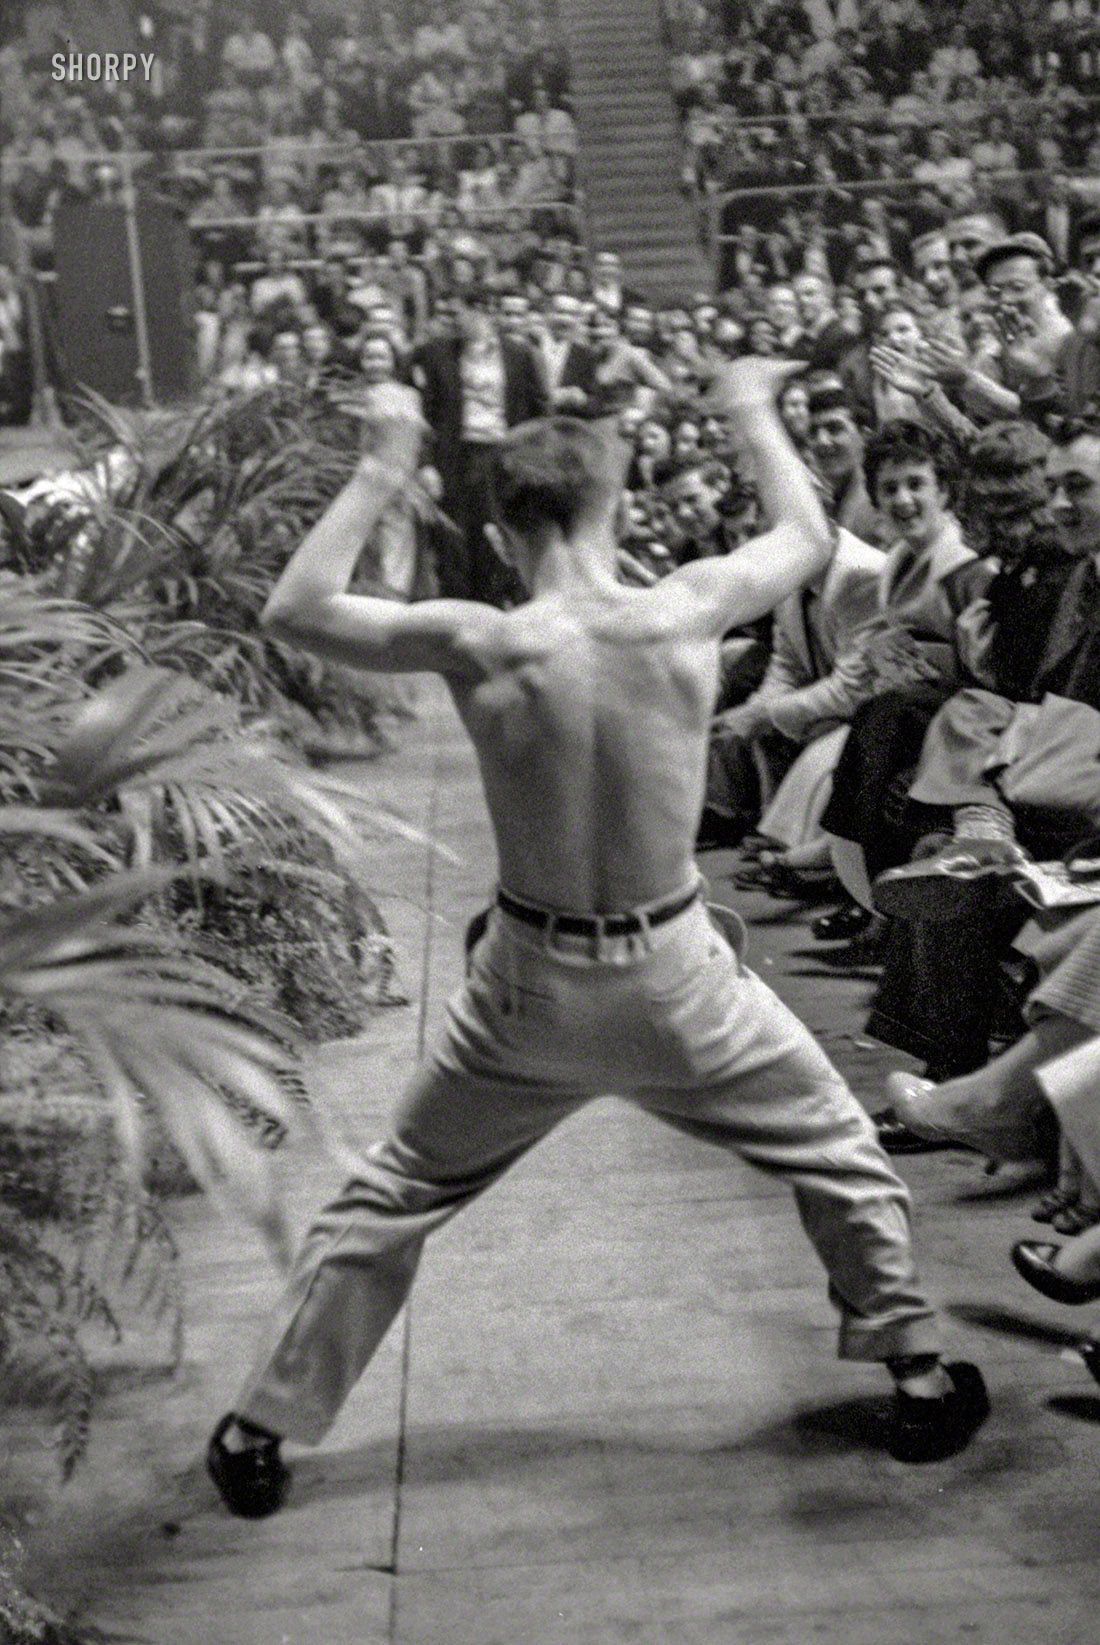 April 1956. "Shirtless teenaged boy dancing in the audience at a performance by Bill Haley and the Comets and LaVern Baker at the Sports Arena, Hershey, Pennsylvania." From photos, last seen here, by Ed Feingersh for the Look magazine article "The Great Rock 'n' Roll Controversy." View full size.